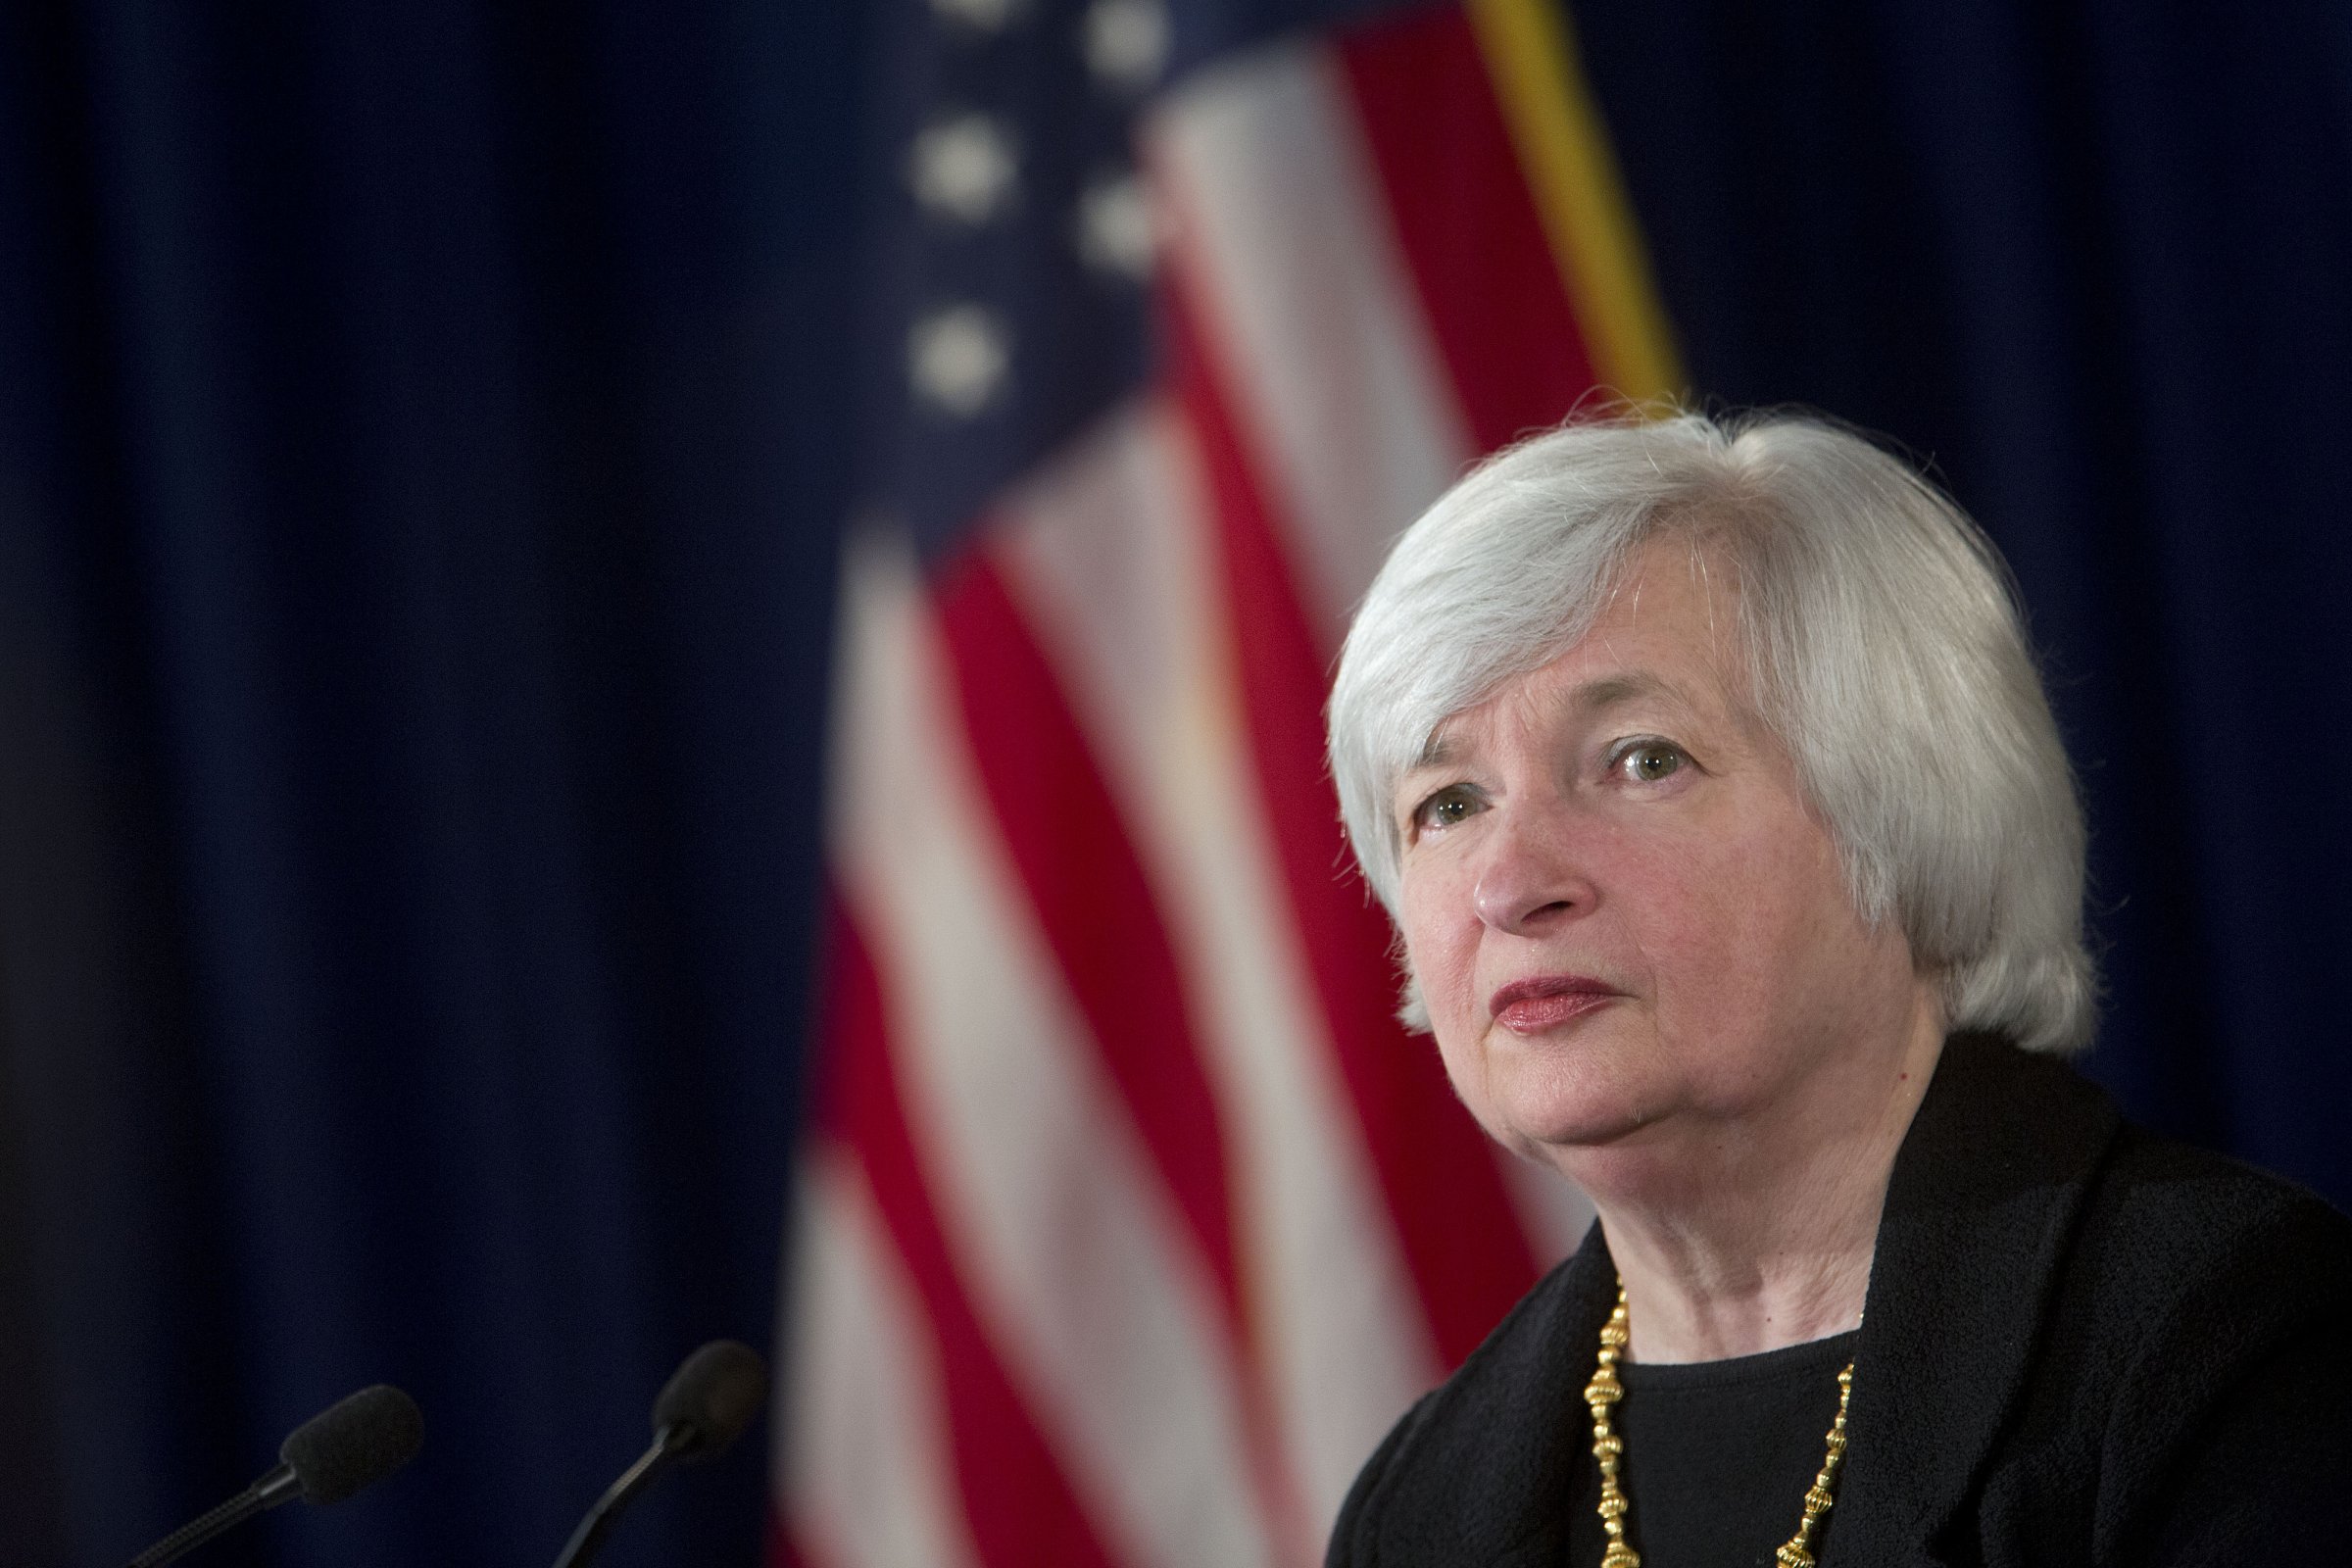 Janet Yellen, chair of the U.S. Federal Reserve, listens to a question during a news conference following a Federal Open Market Committee (FOMC) meeting in Washington on Sept. 17, 2014.